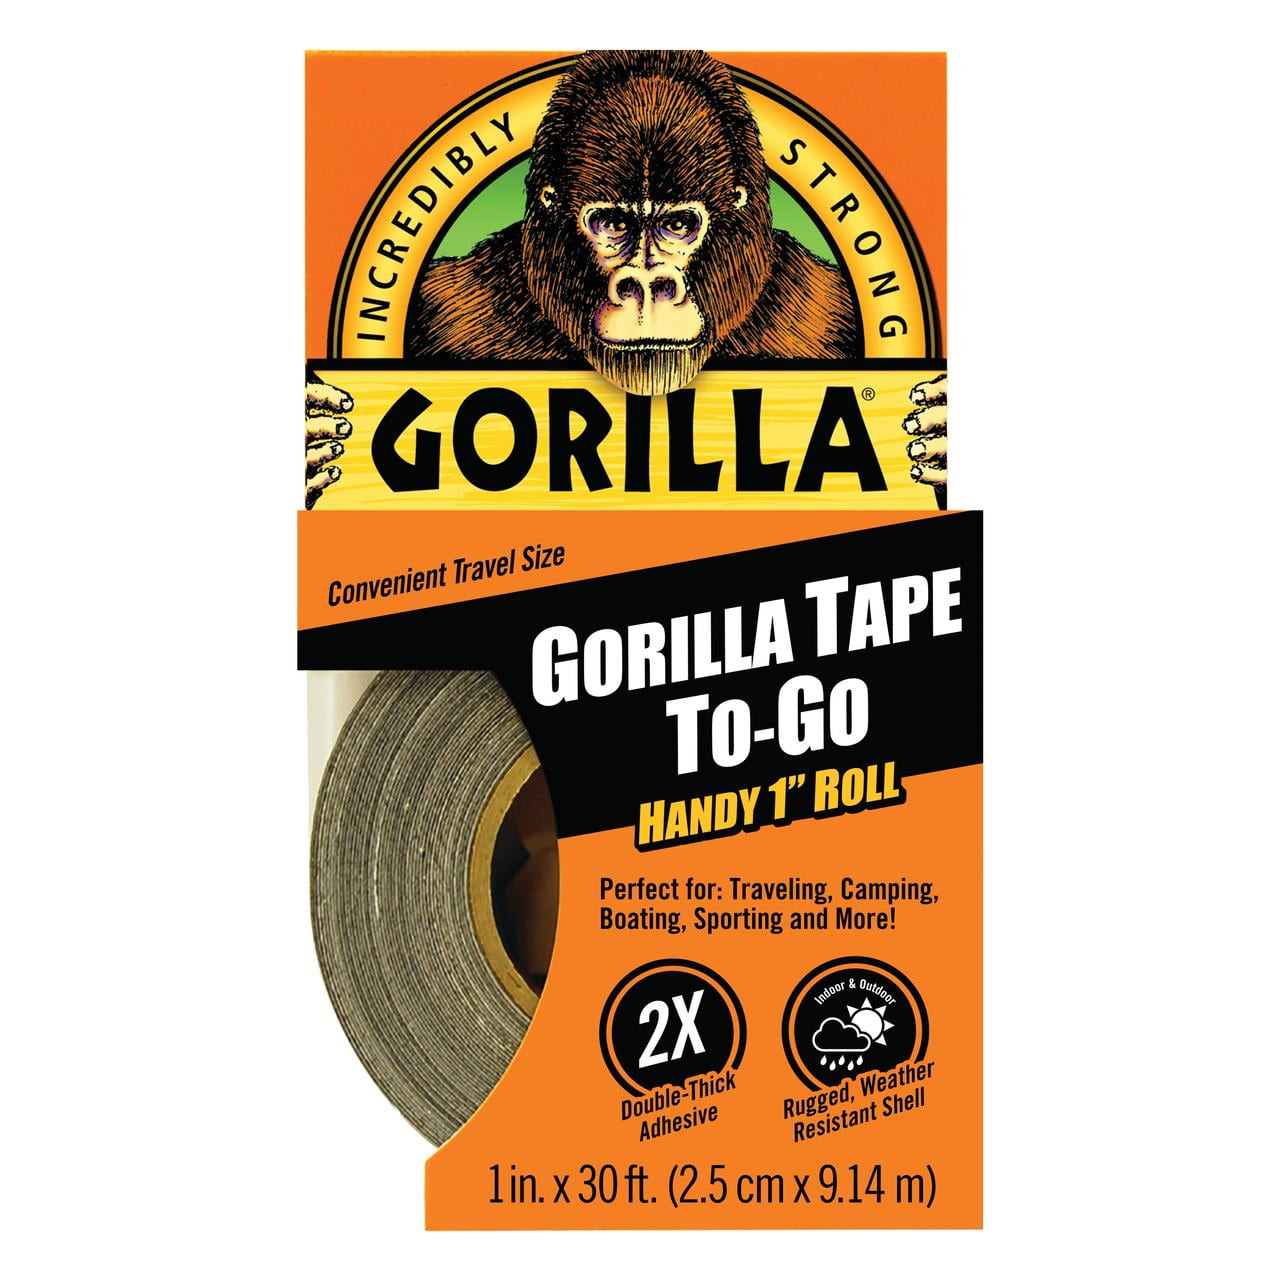 Gorilla Glue Tape To Go 3 PACK Duct Tape Handy Roll 1" x 30' 